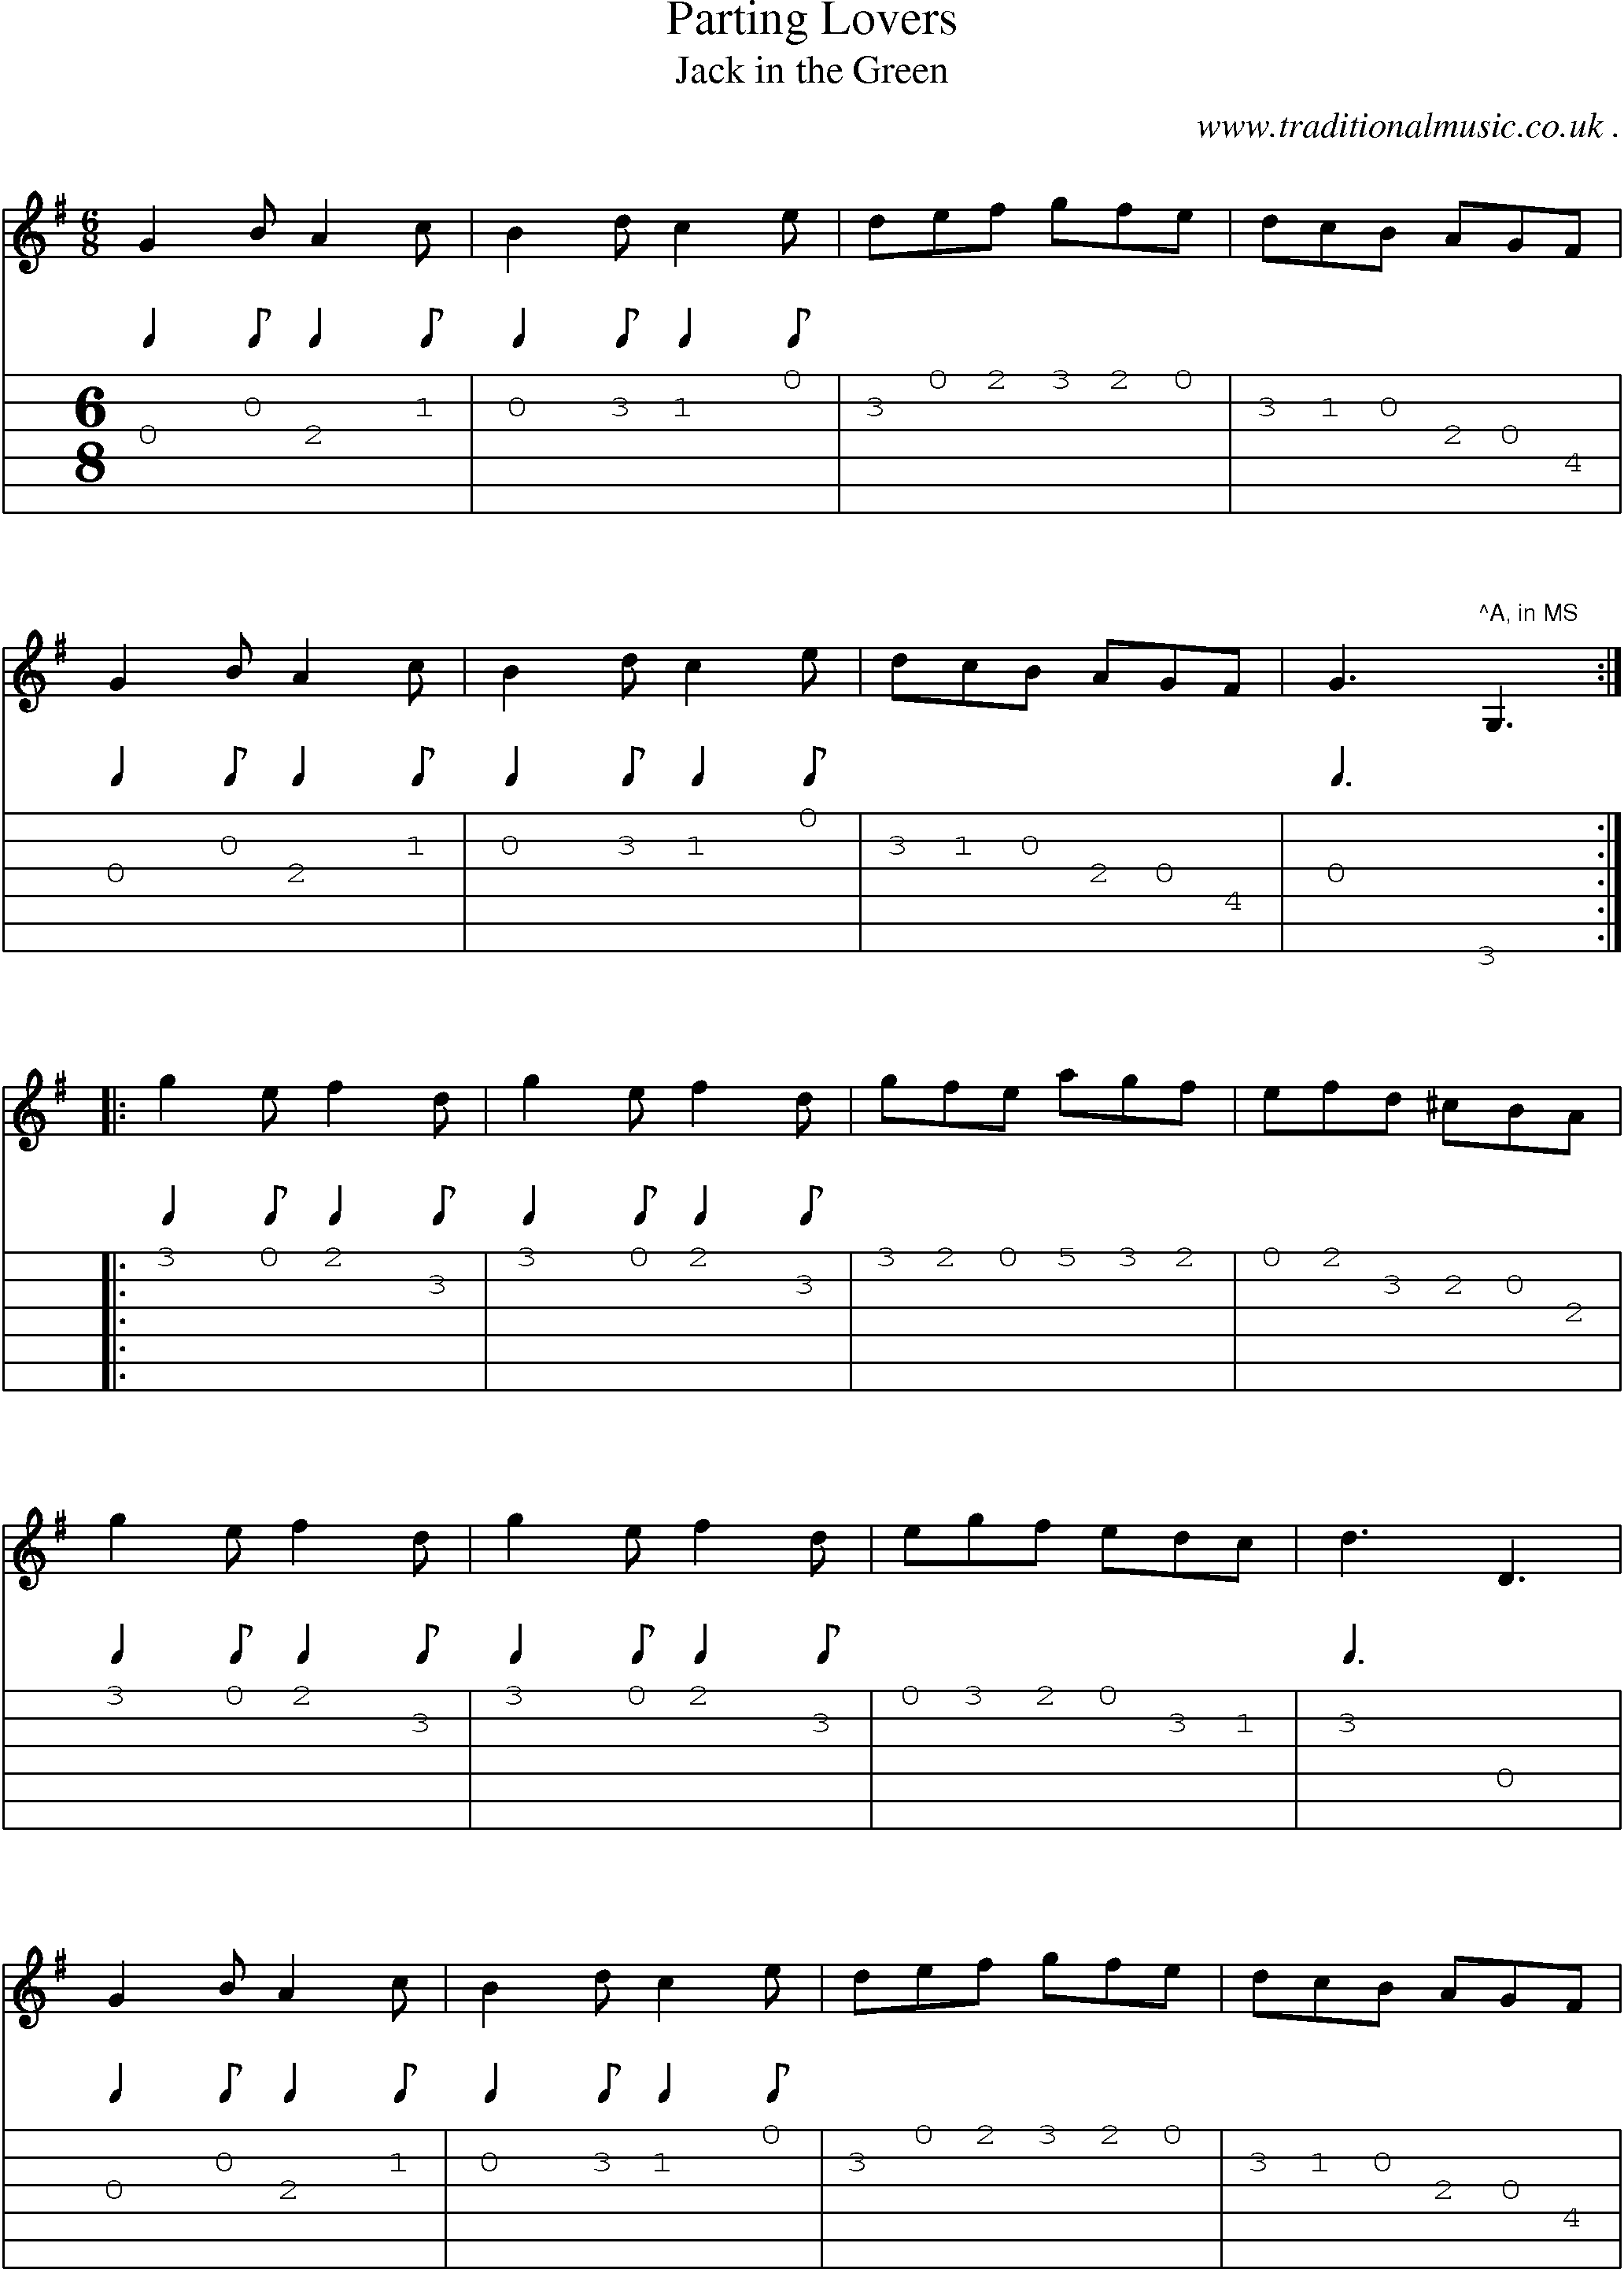 Sheet-Music and Guitar Tabs for Parting Lovers